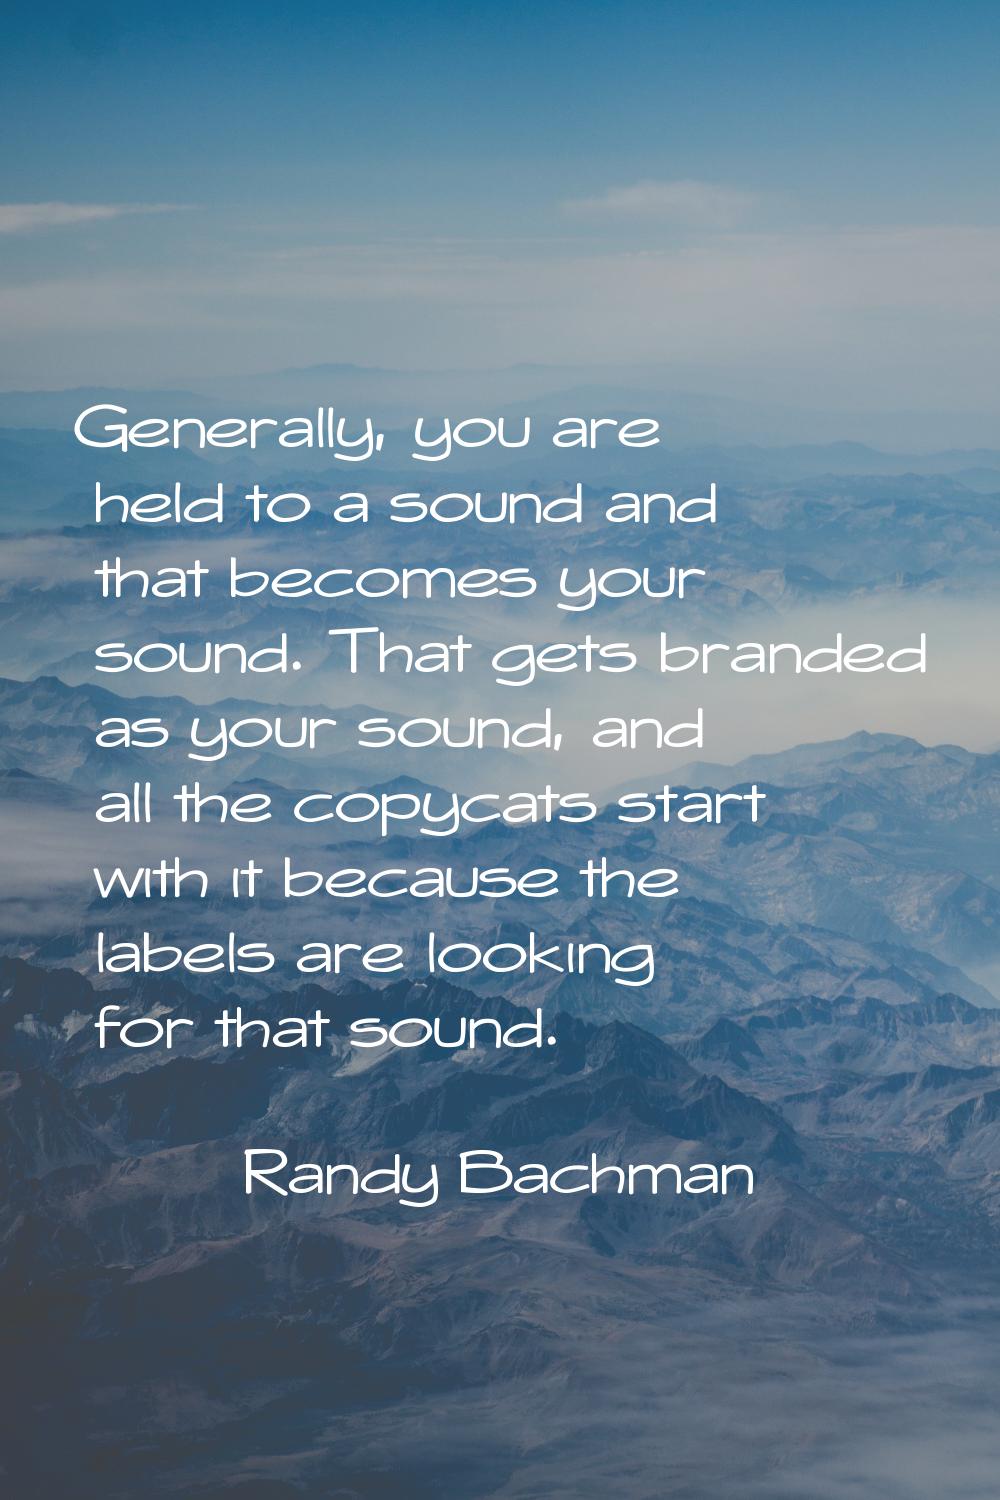 Generally, you are held to a sound and that becomes your sound. That gets branded as your sound, an